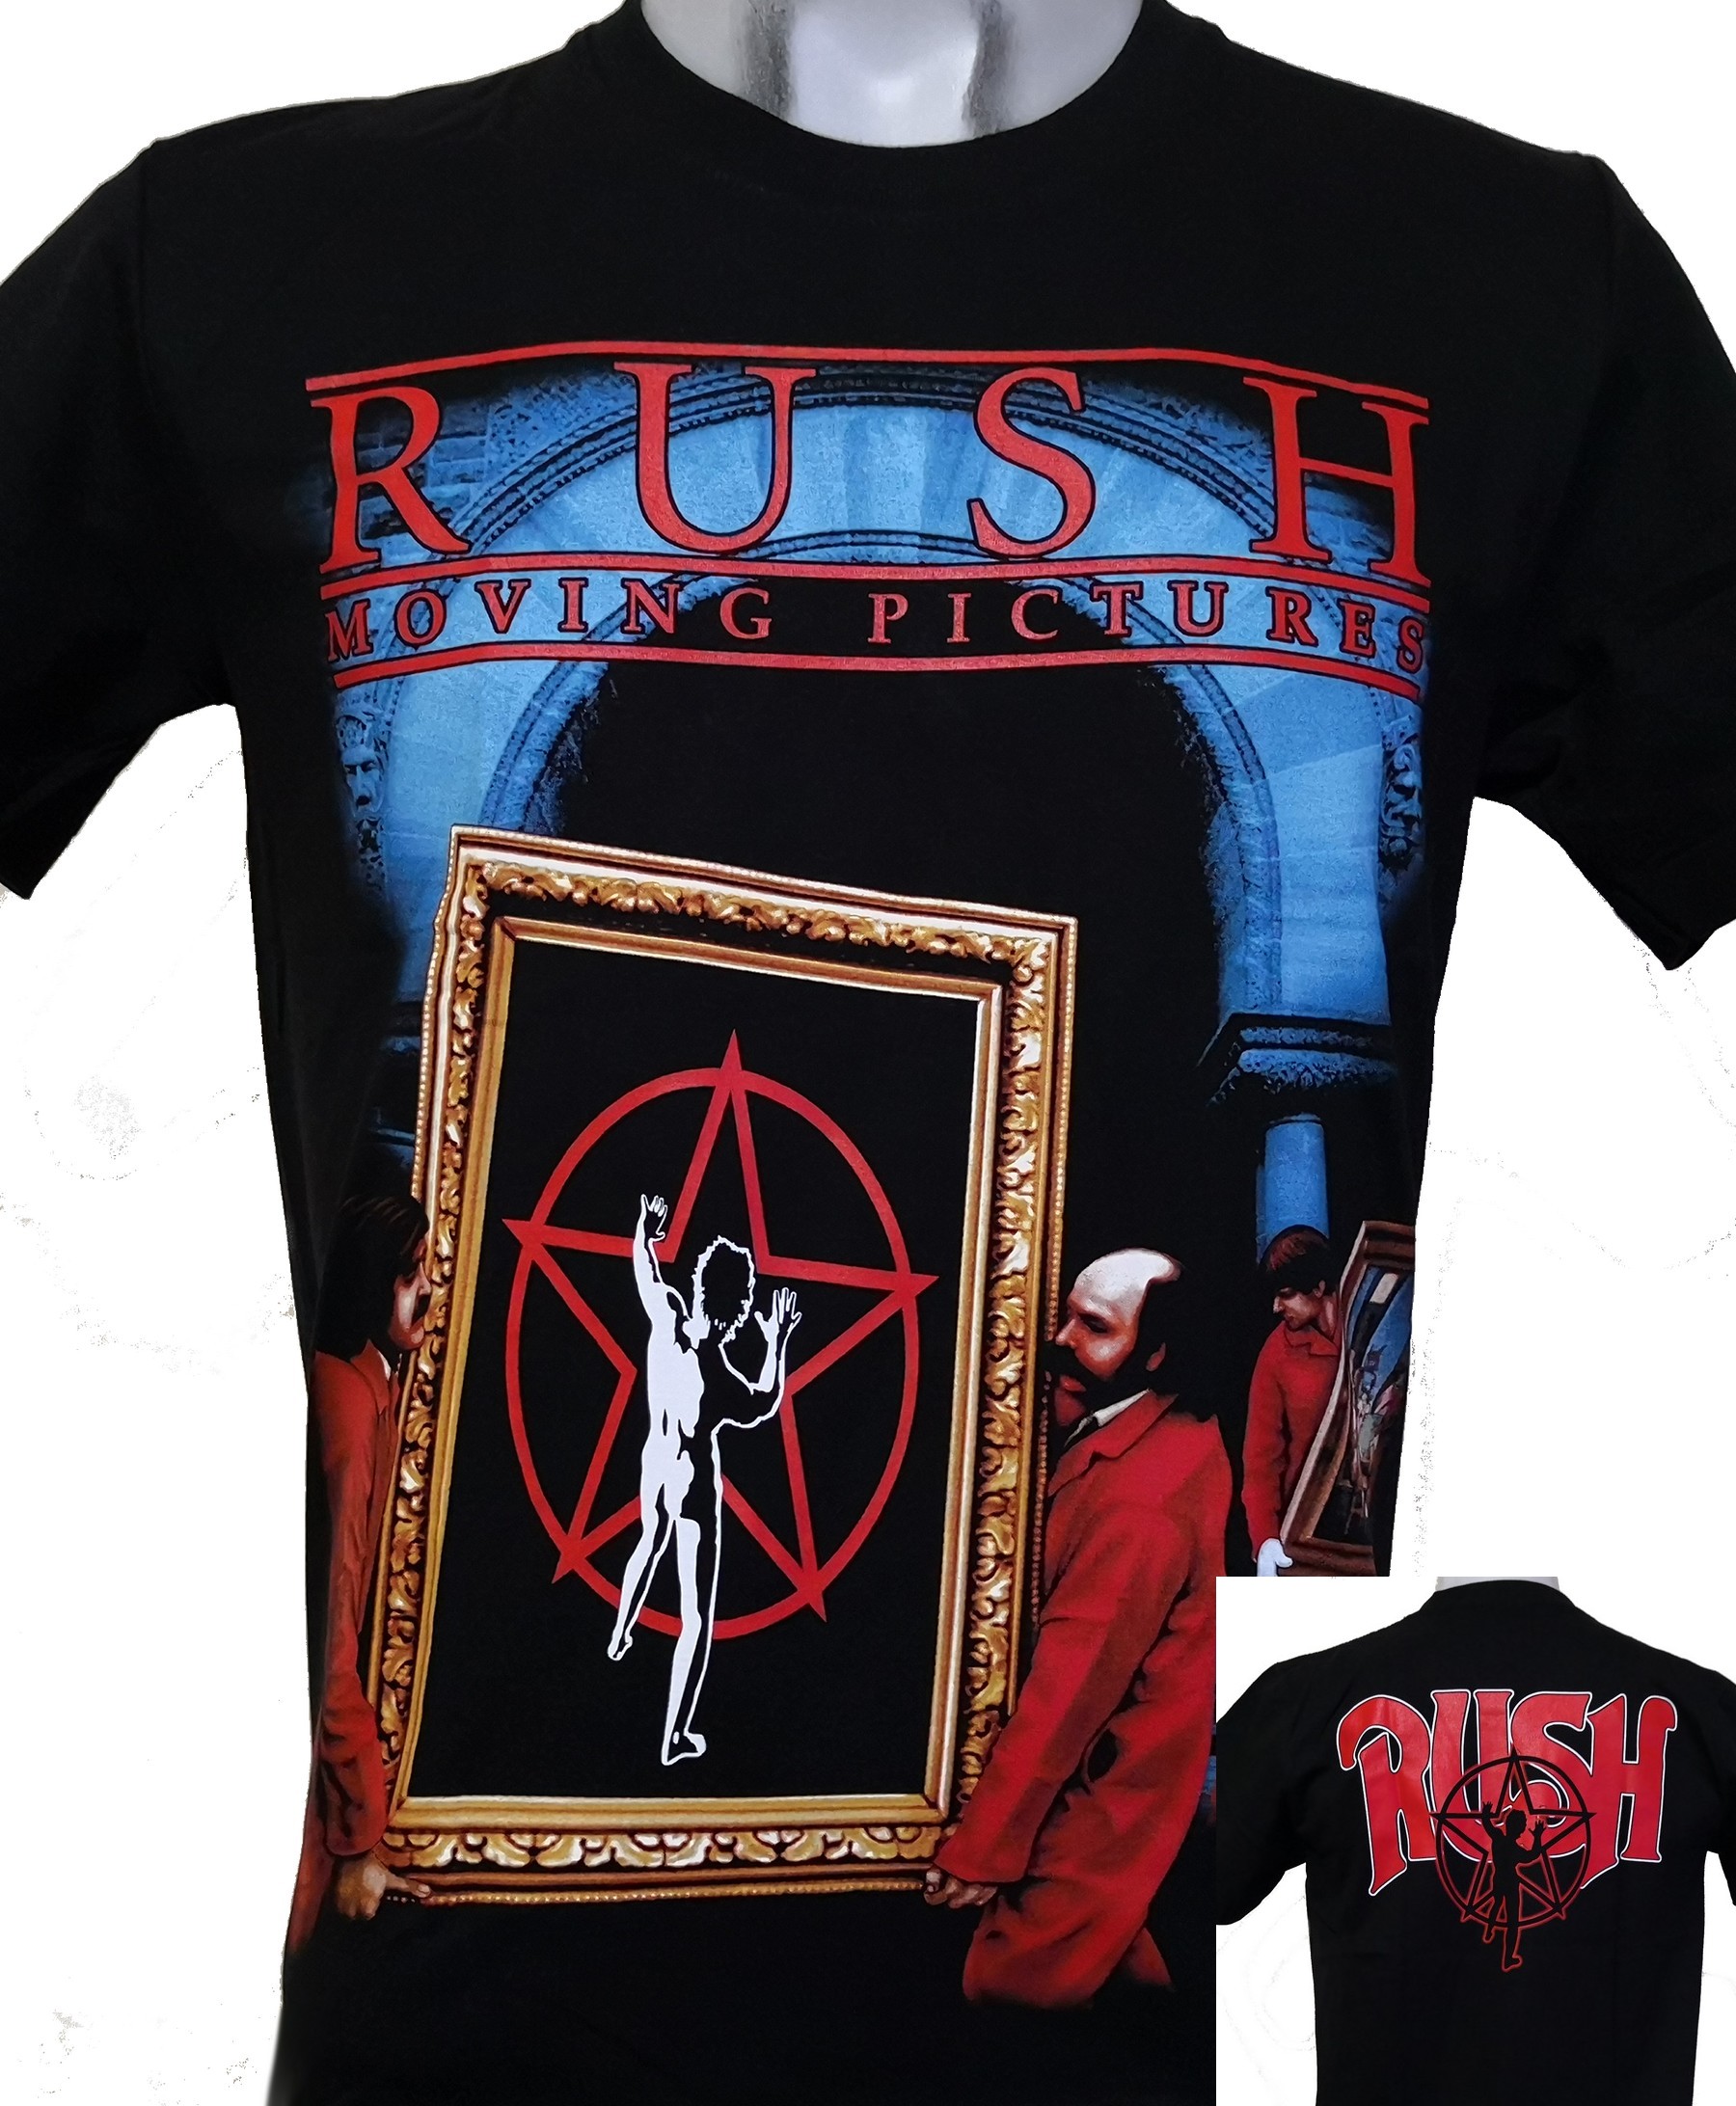 New Official Rush Moving Pictures T-Shirt Rock Band Tour Merch Geddy Le S to 2XL 